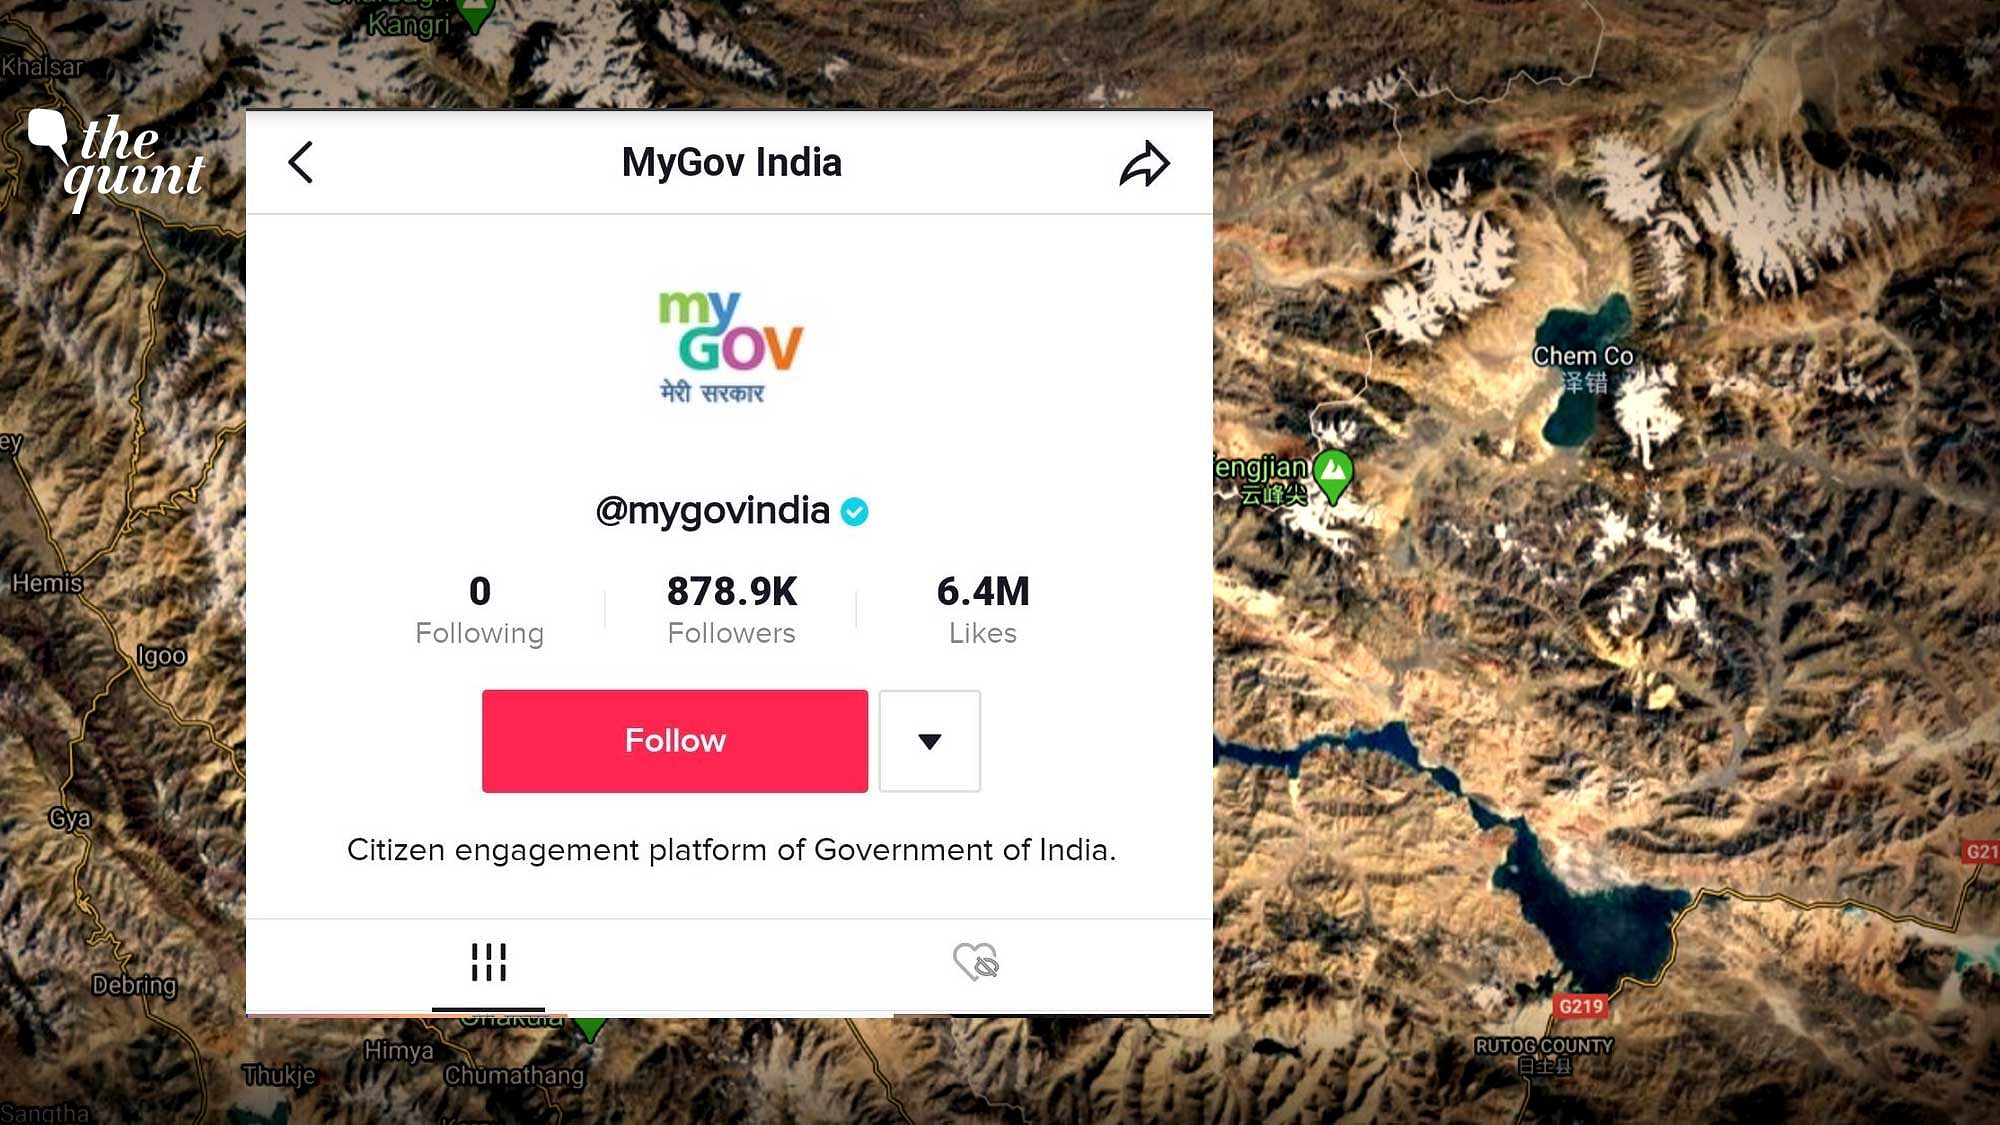 On 6 June, the government launched its official TikTok account.